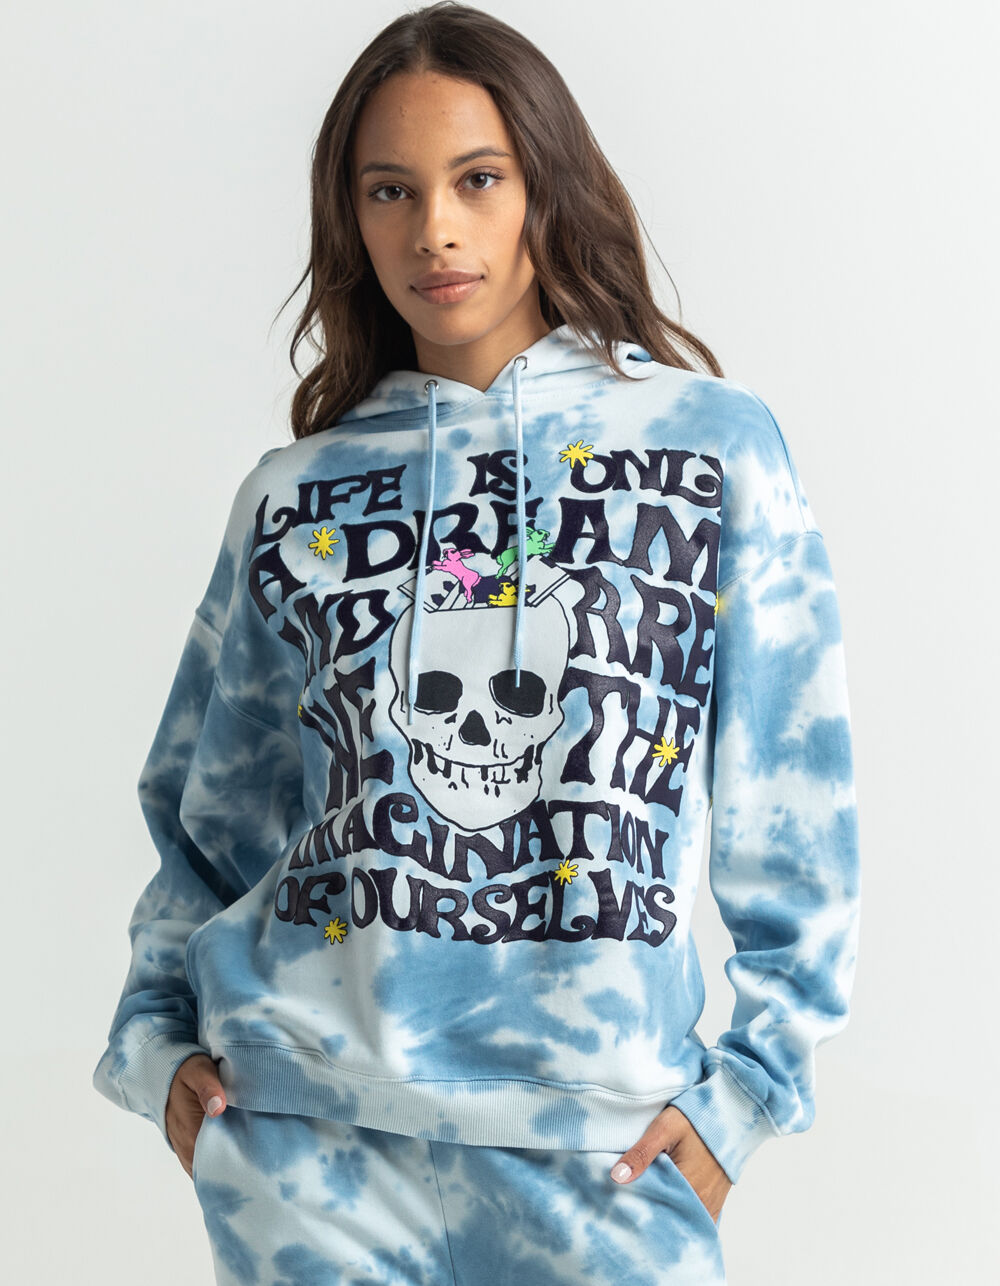 CONEY ISLAND PICNIC Life Is Only A Dream Womens Hoodie - BLUE COMBO ...